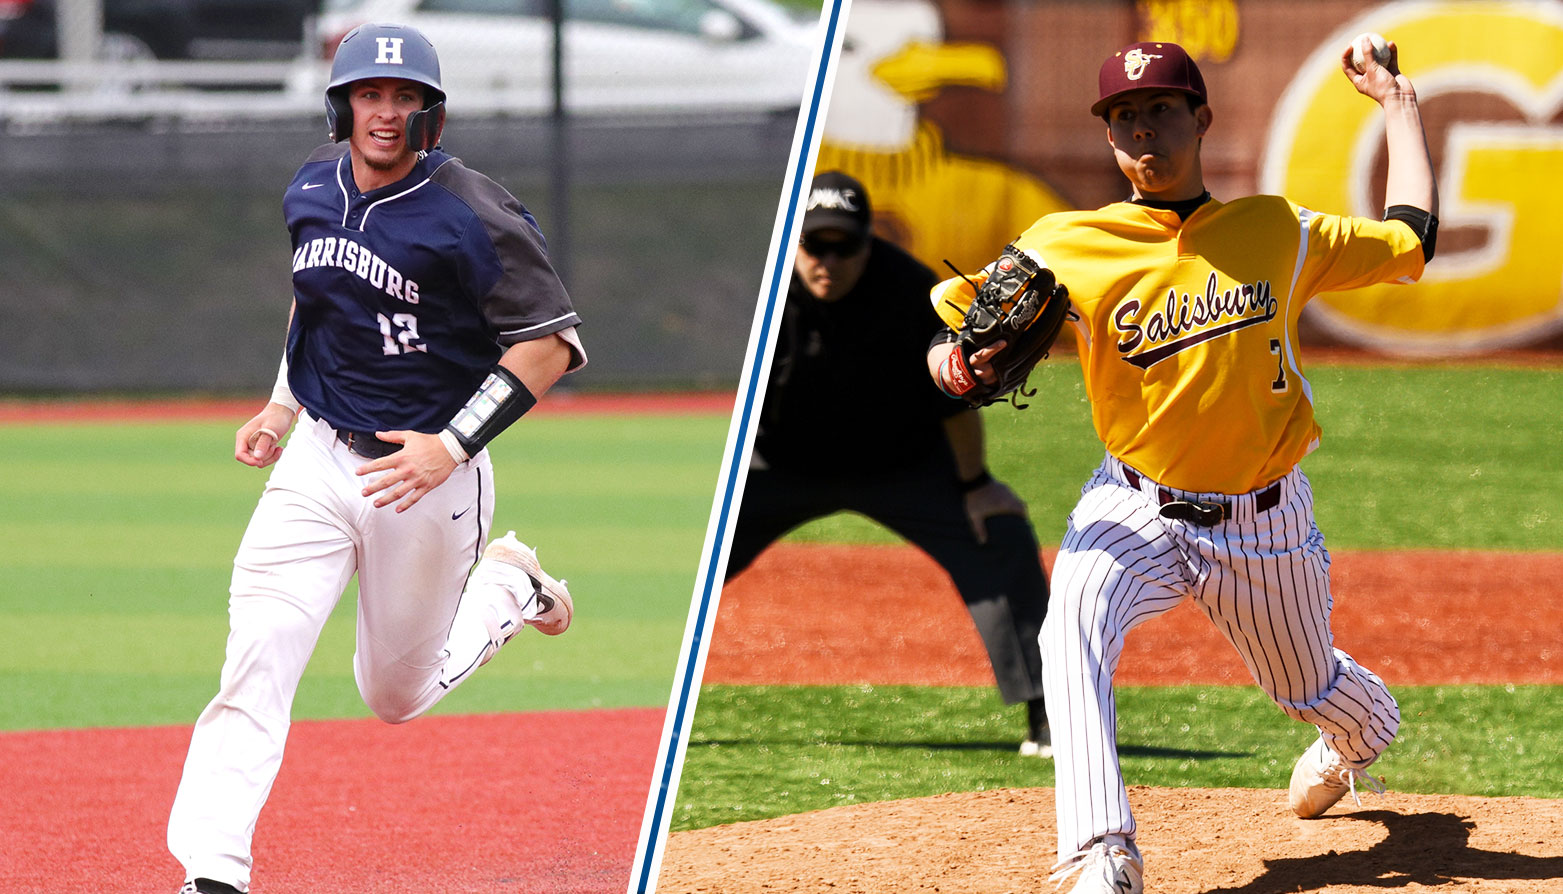 Penn State Harrisburg's Bret Williams & Salisbury's Xavier Marmol Collect CAC Baseball Player of the Week Honors